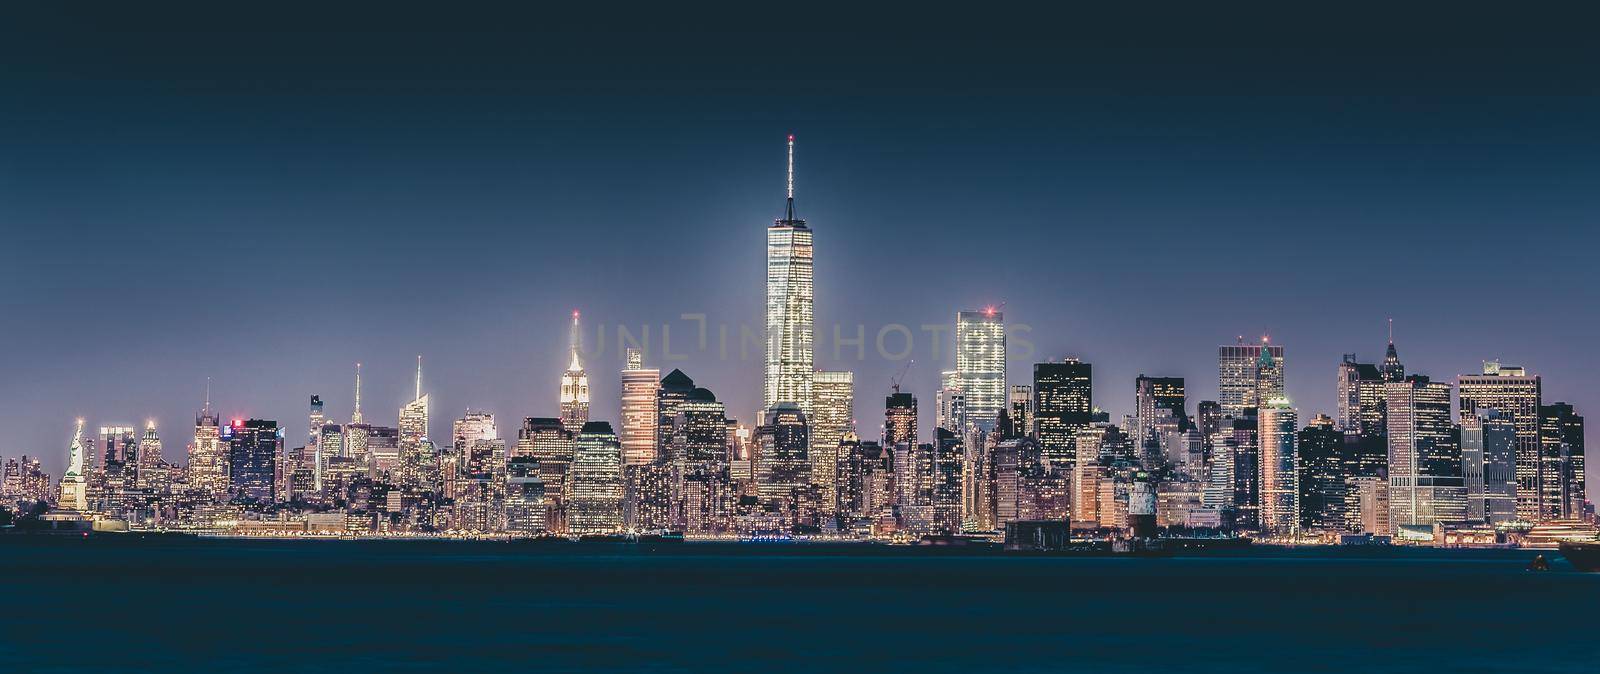 New York City Manhattan downtown skyline at dusk with skyscrapers illuminated over Hudson River panorama. Vertical composition.